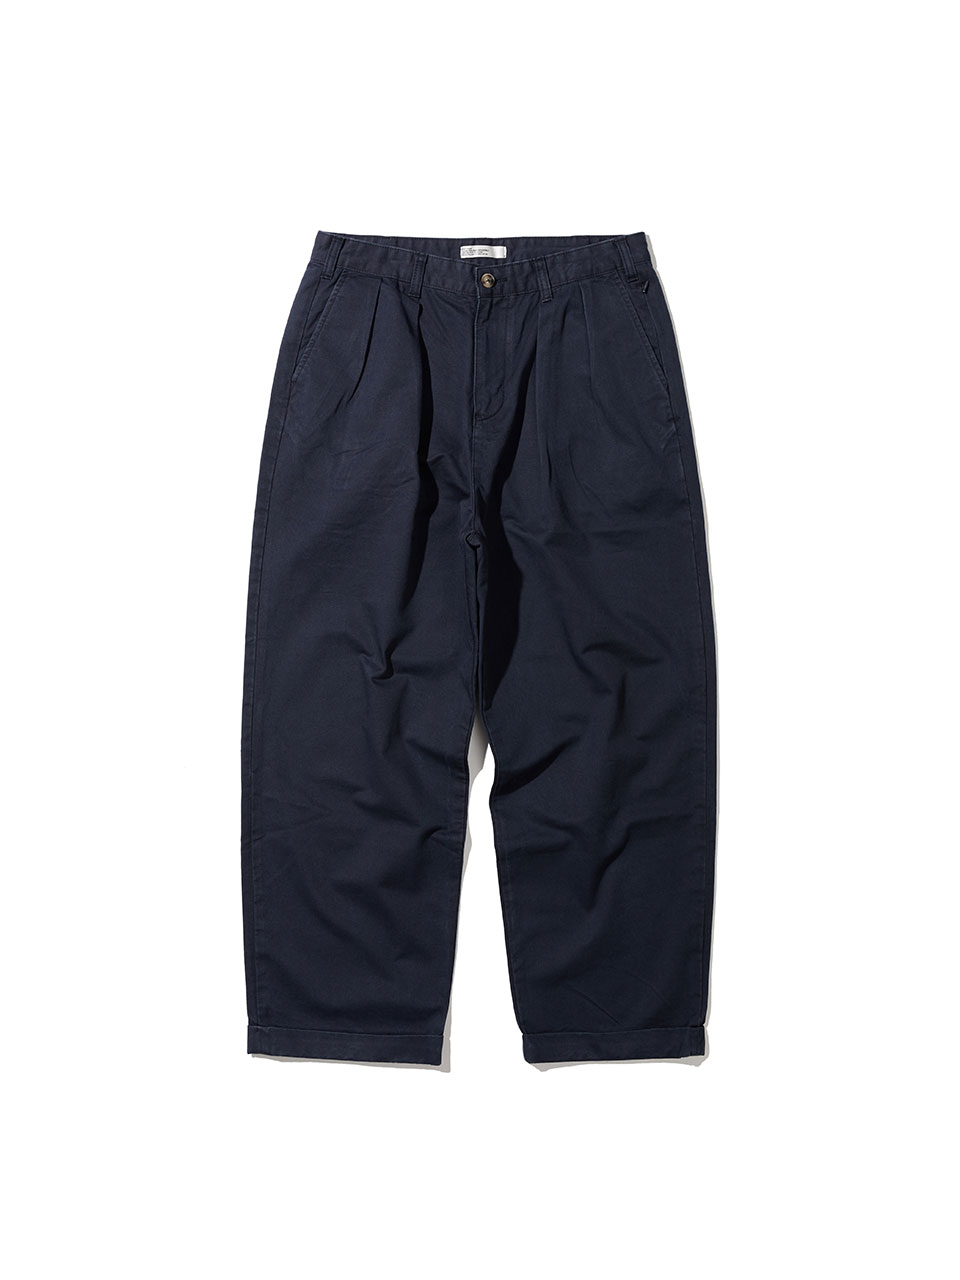 SOUNDSLIFE - Easy Two Tuck Chino Pants Navy